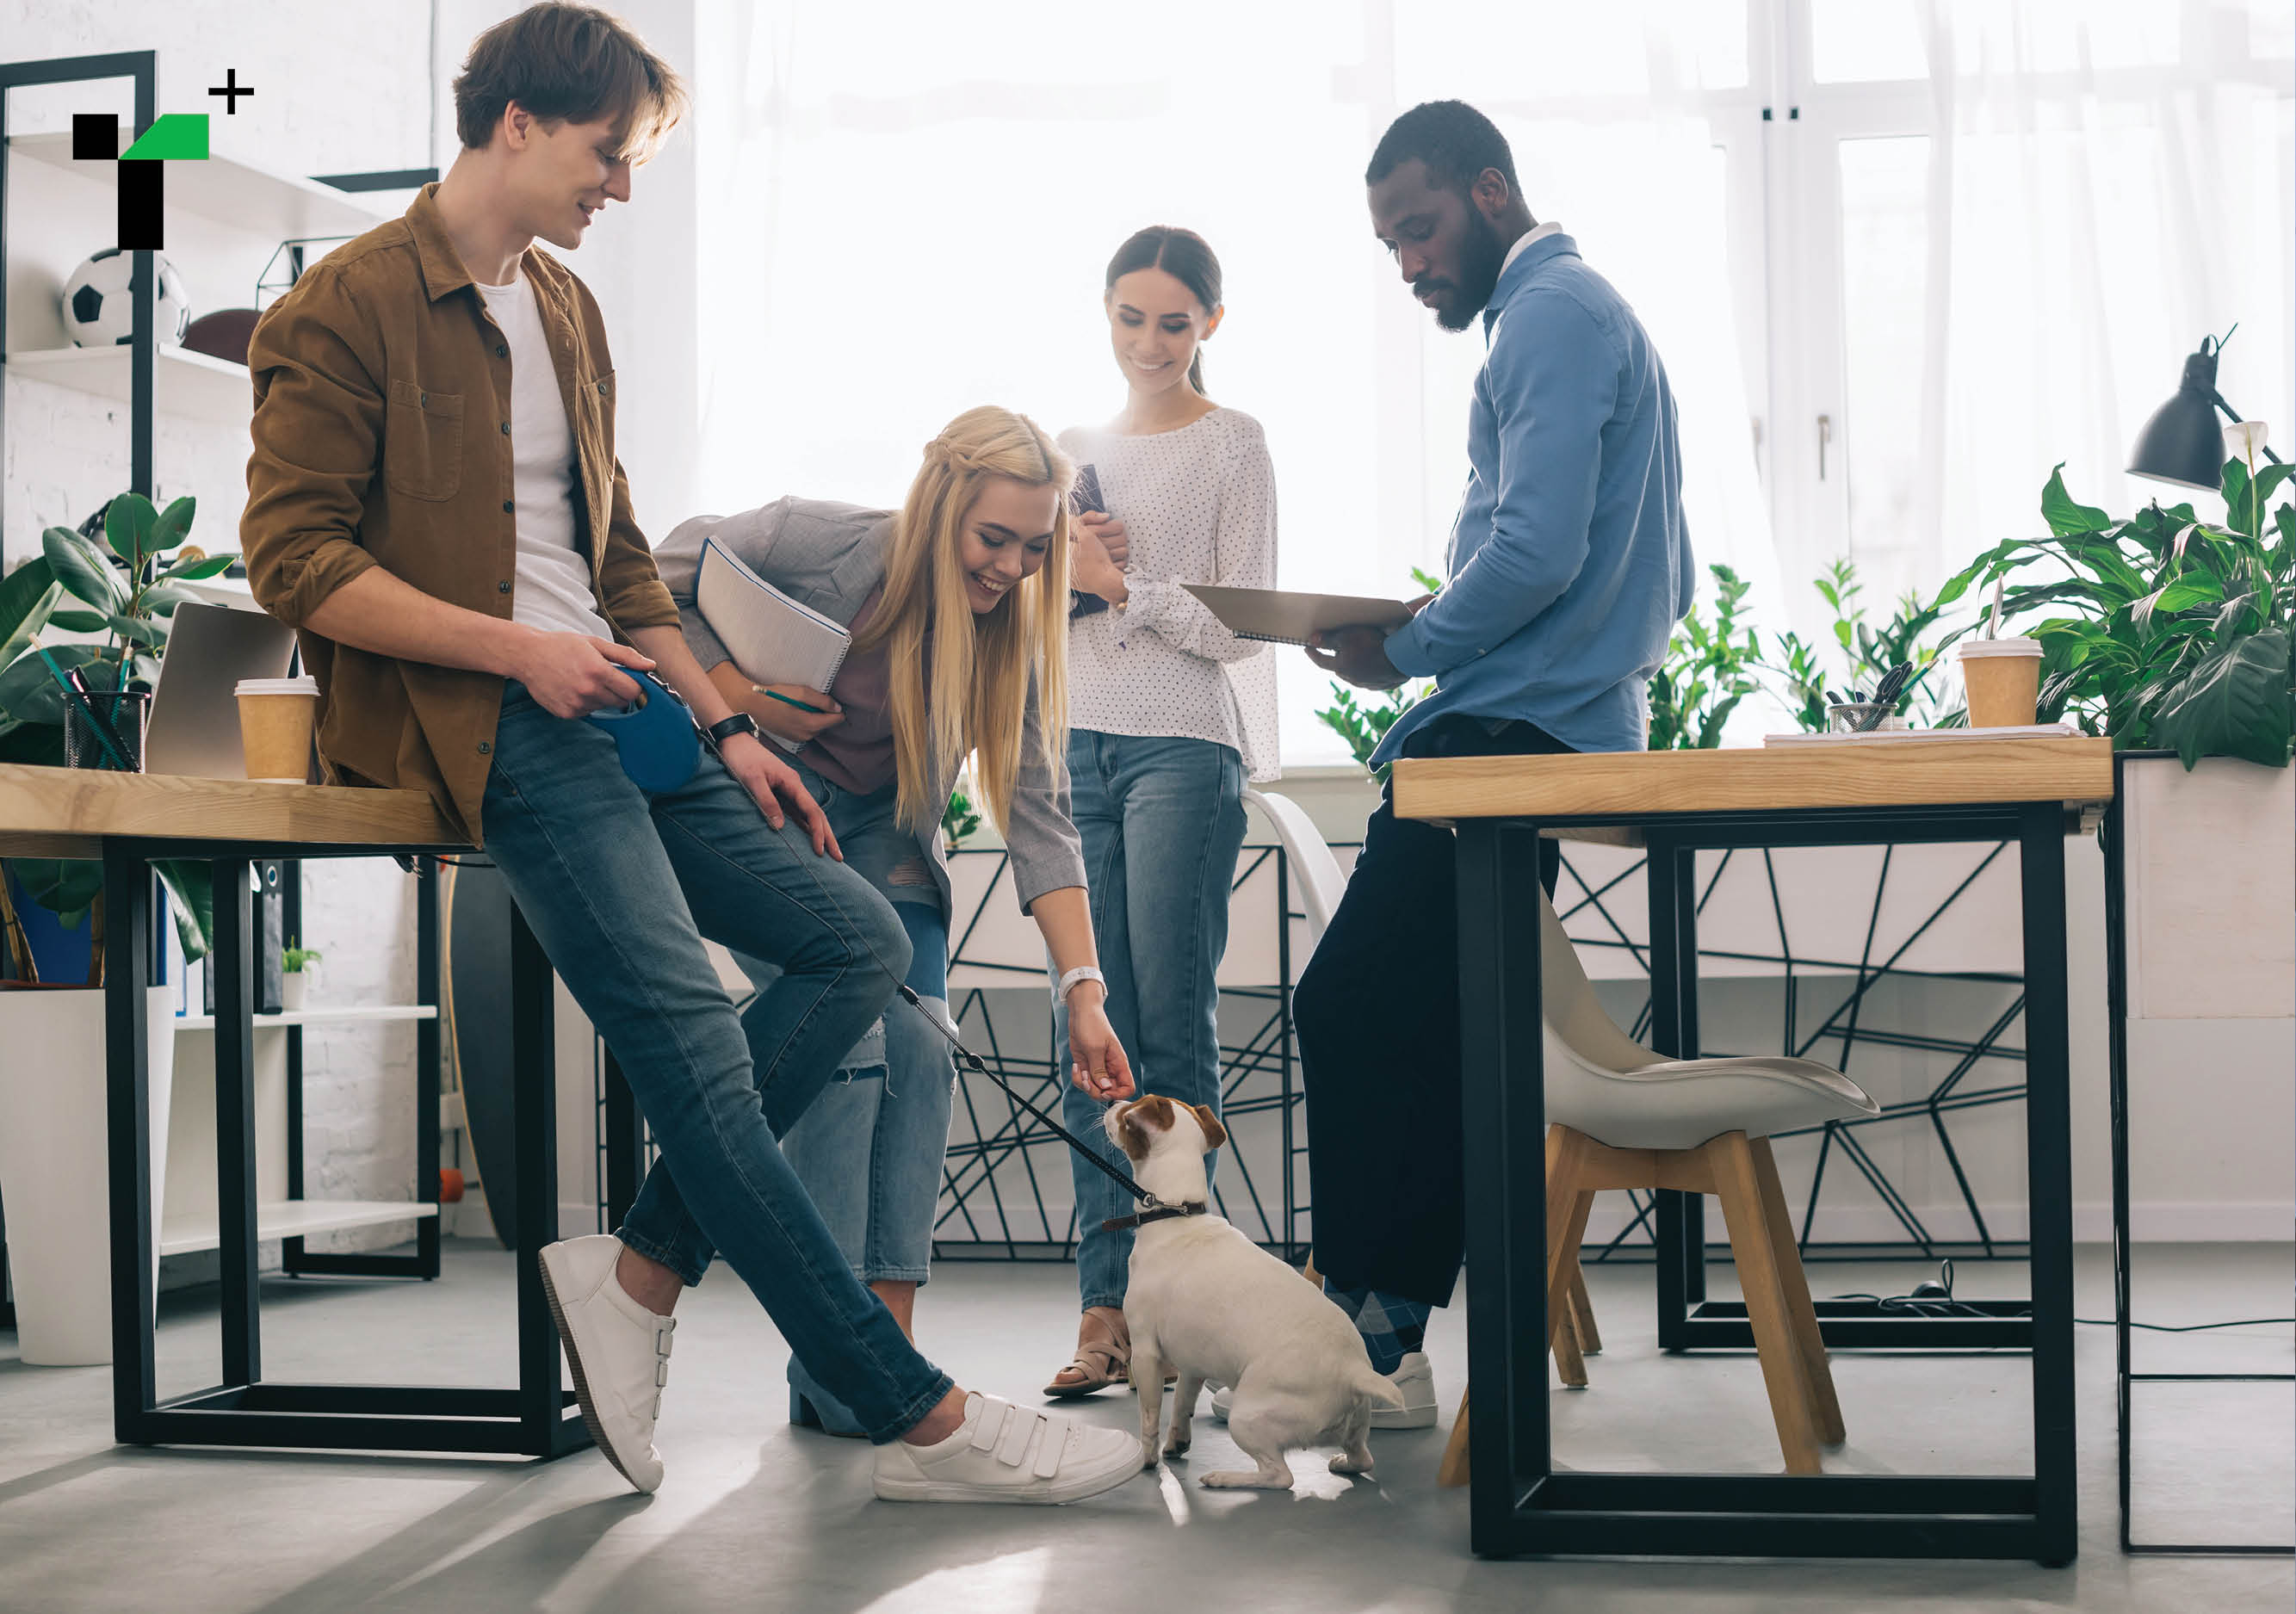 Pet-Friendly Workplaces Are On The Rise: Here's Where To Find Them